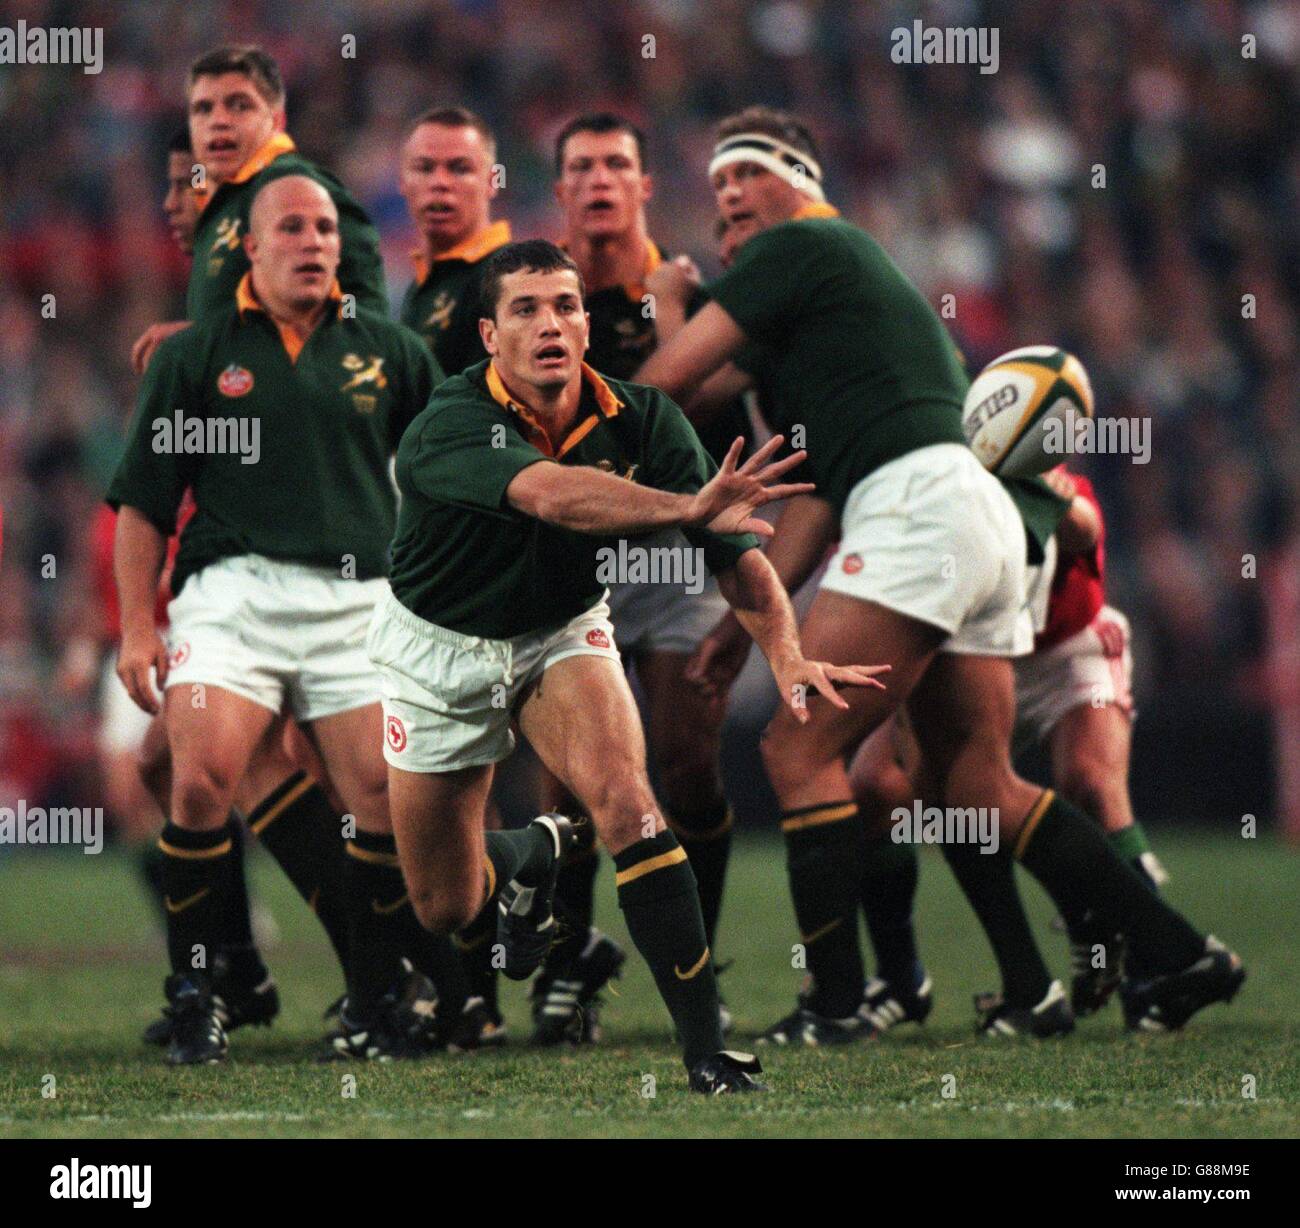 Rugby Union - British Lions Tour of South Africa, 3rd Test. Joost Van der Westhuizen, South Africa Stock Photo